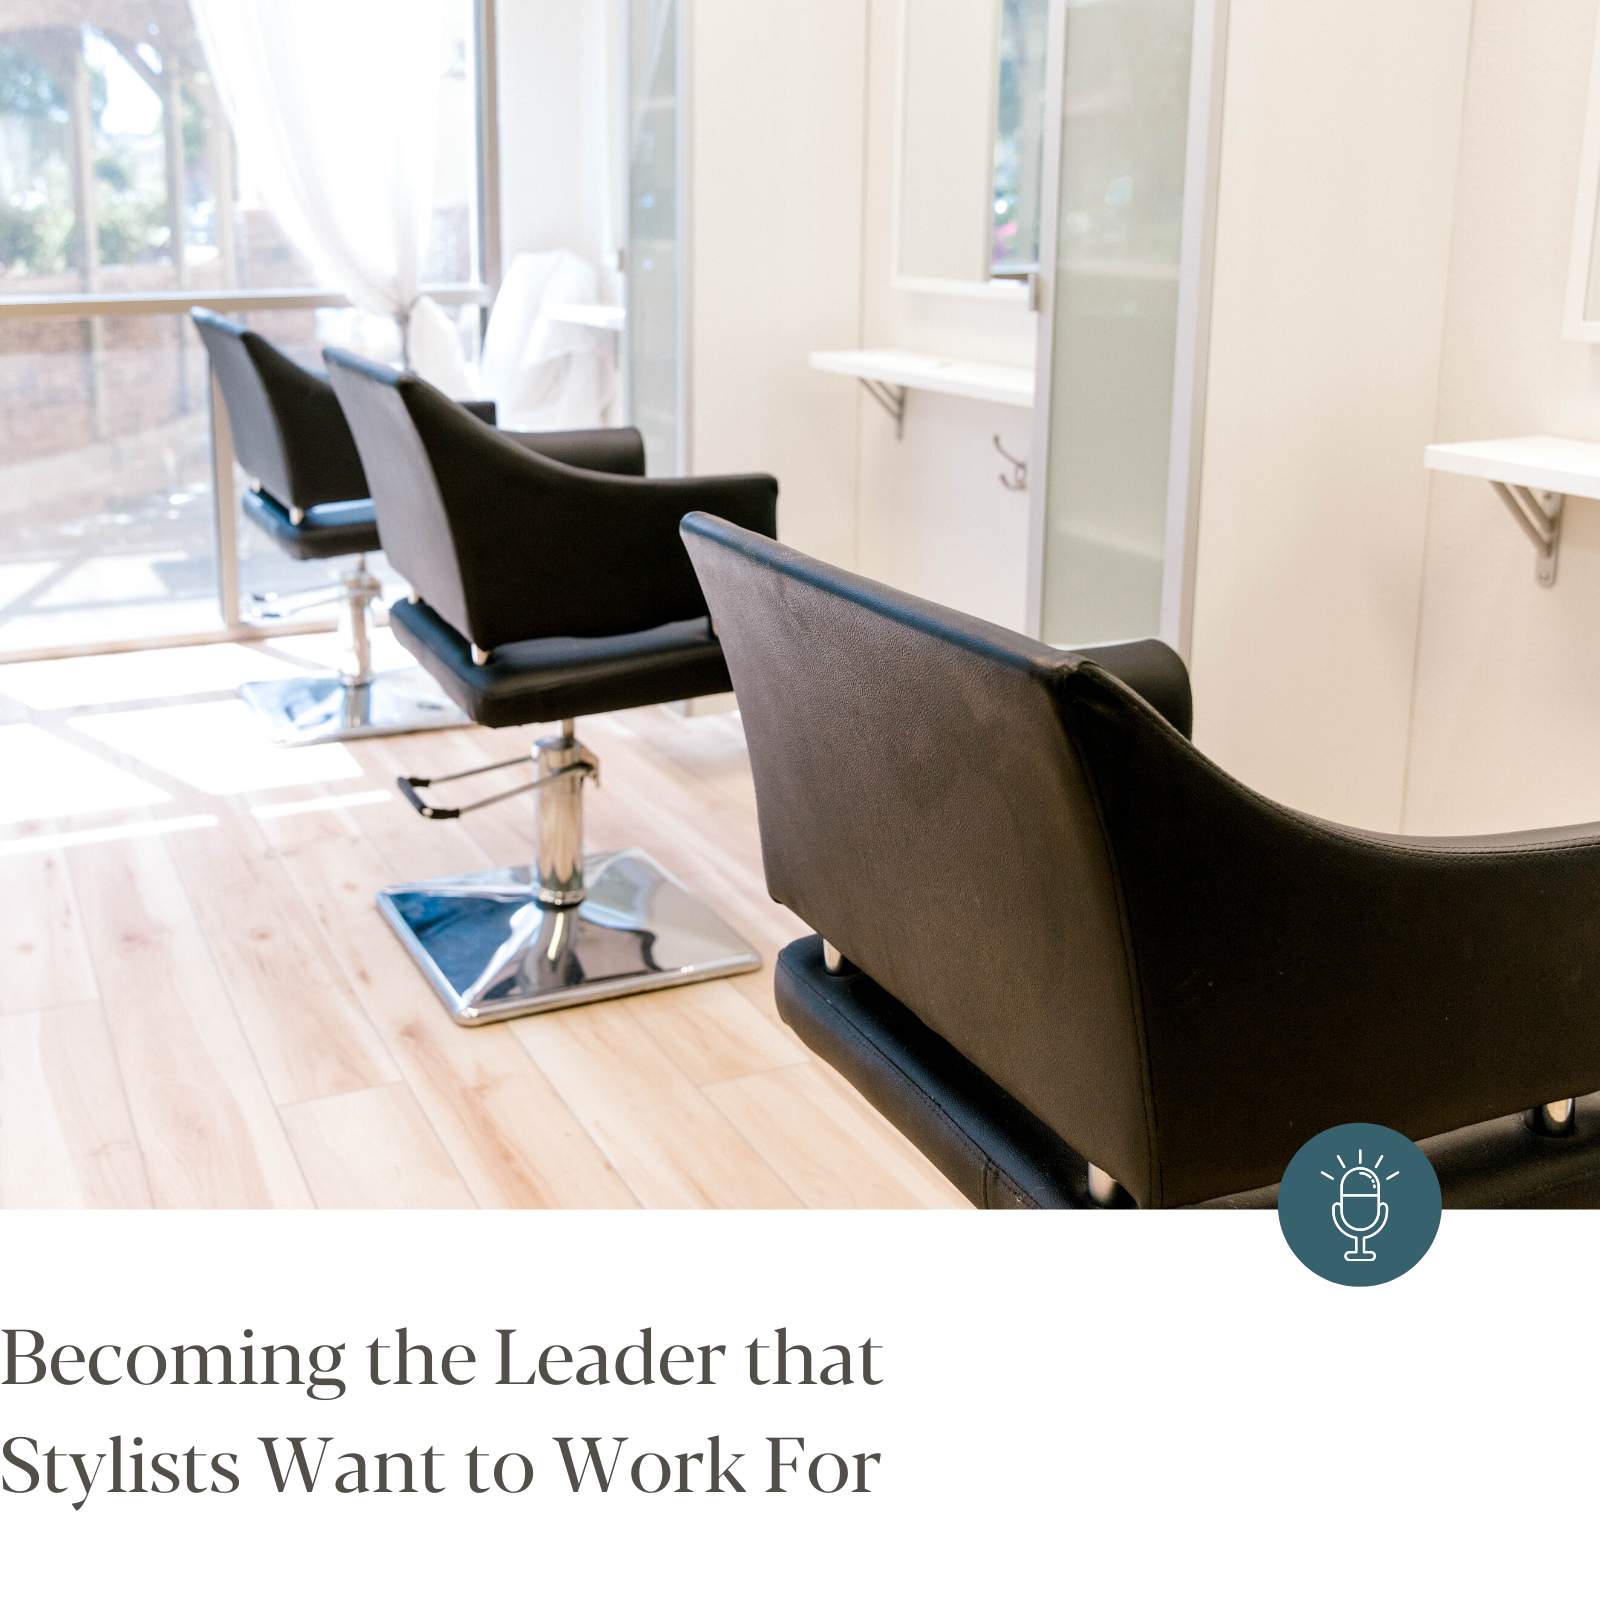 Episode #232 - Becoming the Leader that Stylists Want to Work For